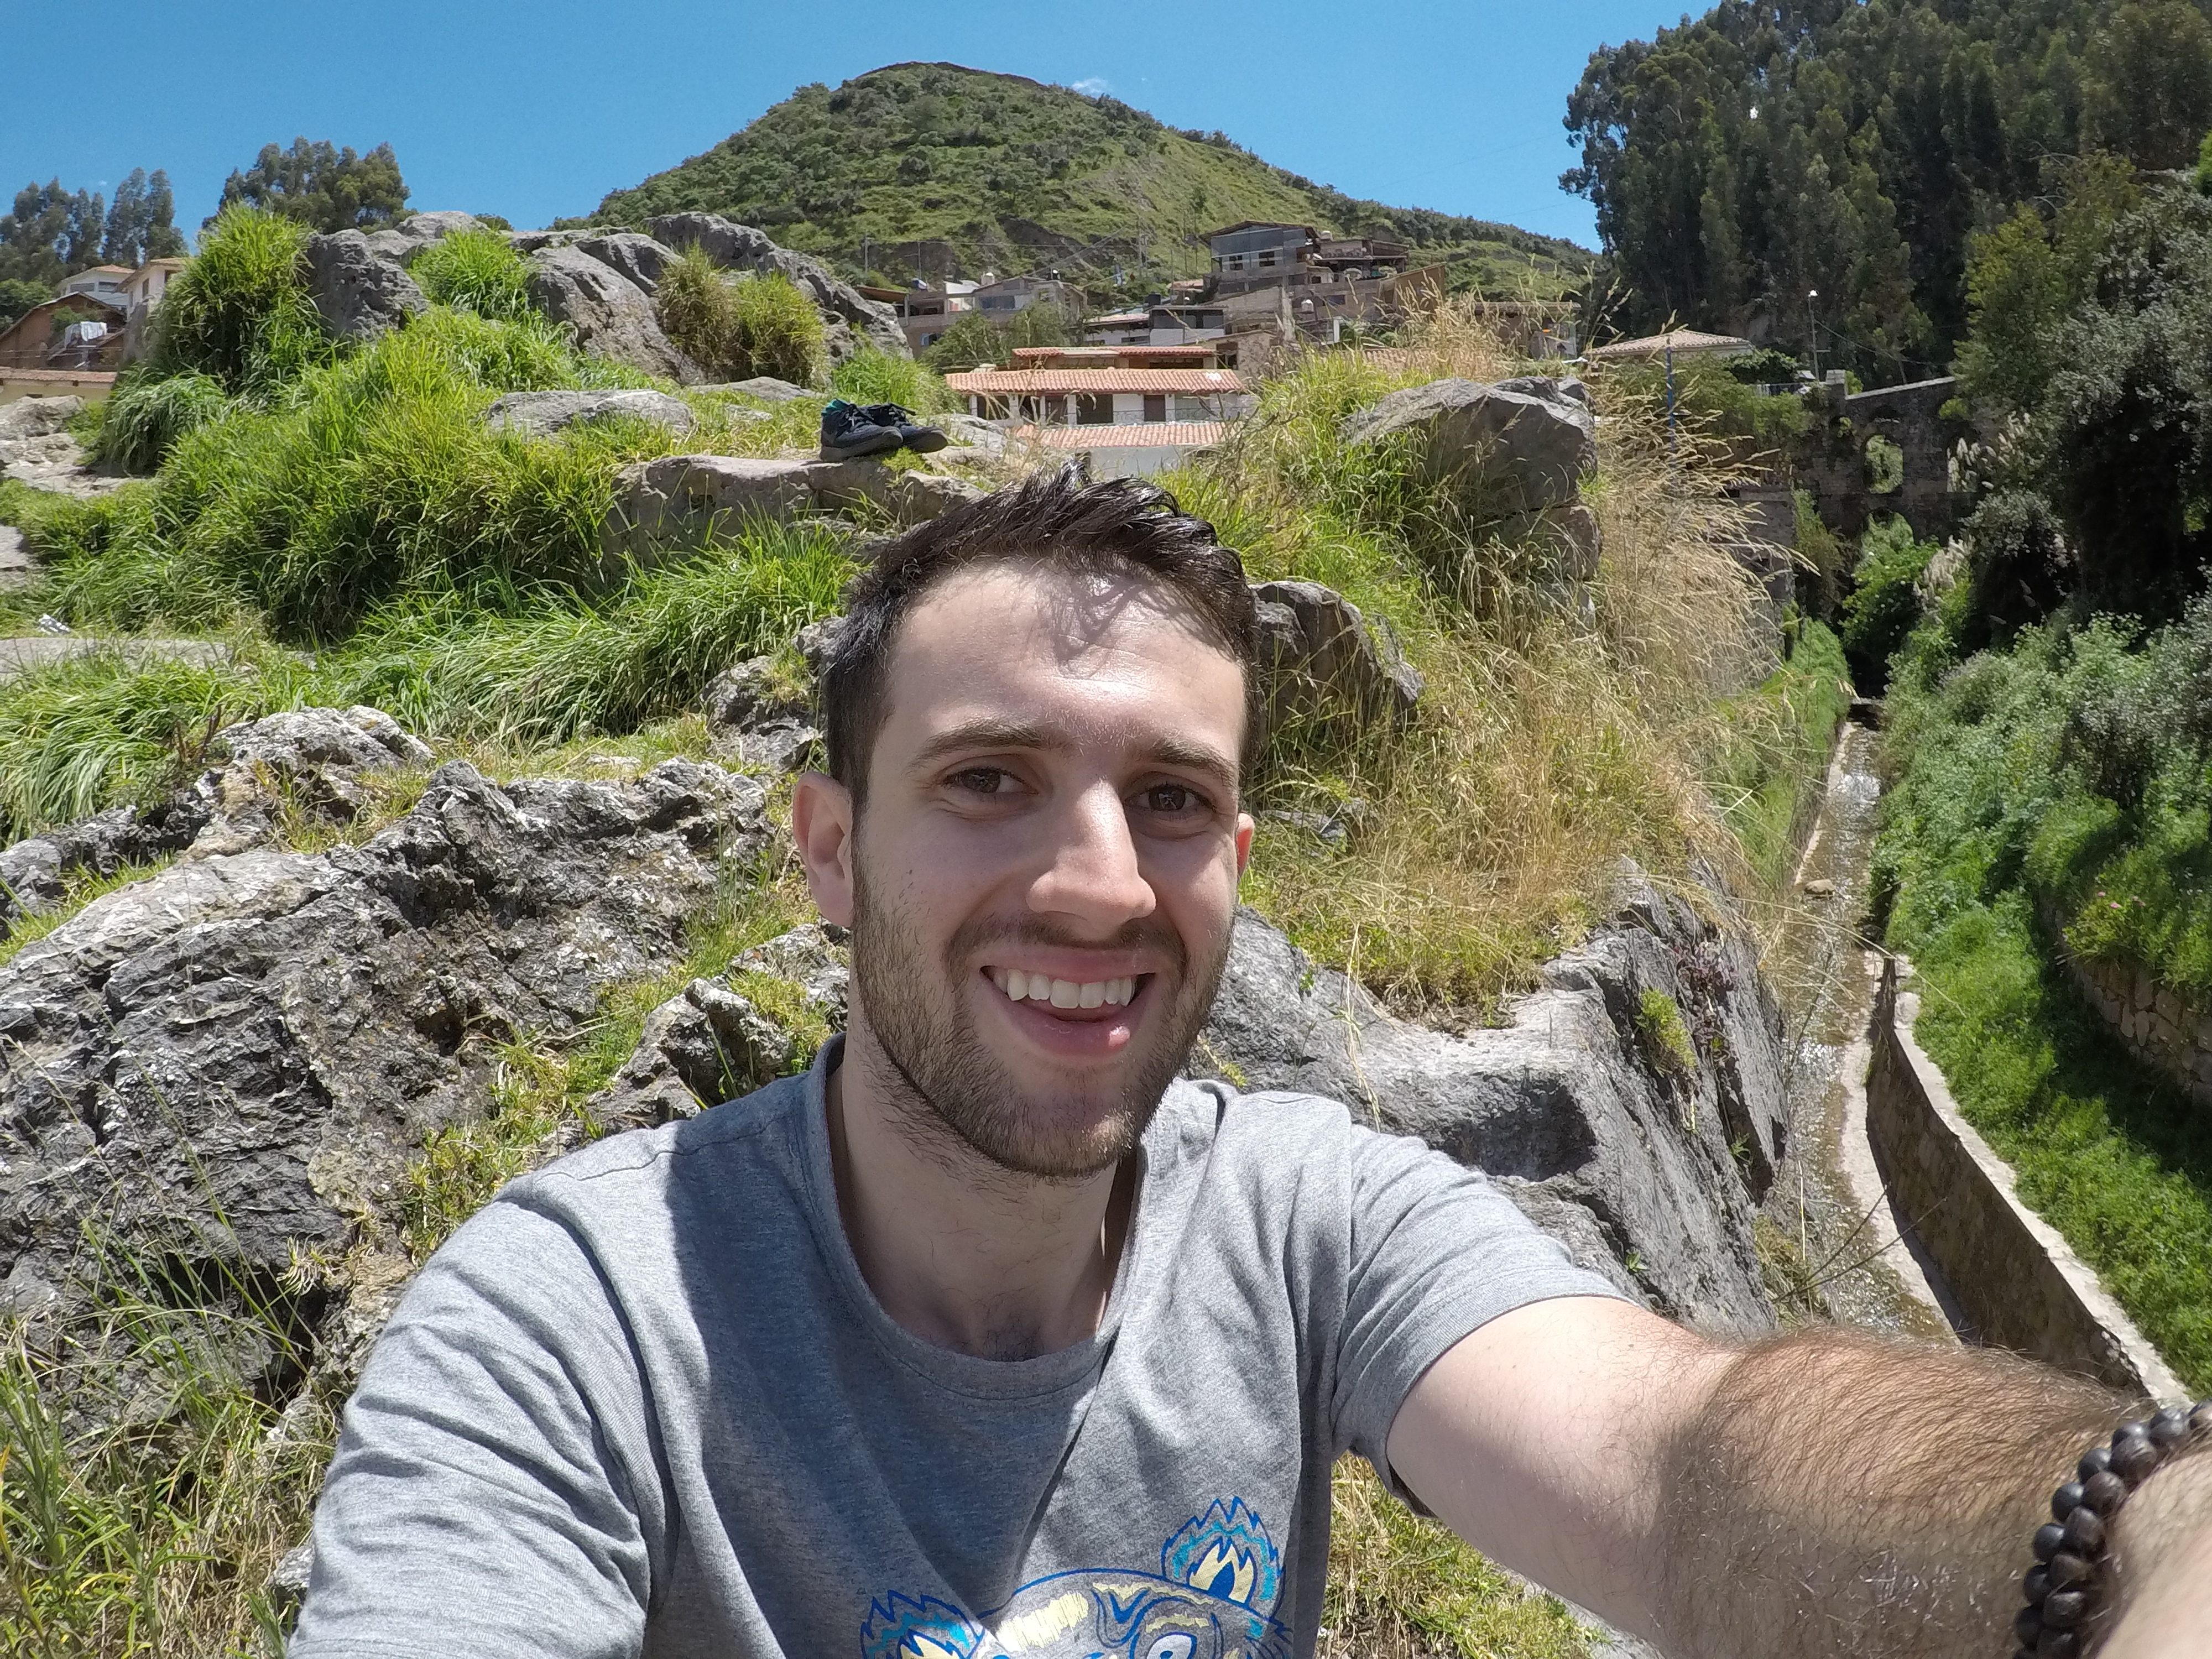 Brad in Cusco, Peru enjoying day 2 of a no cell phone challenge.